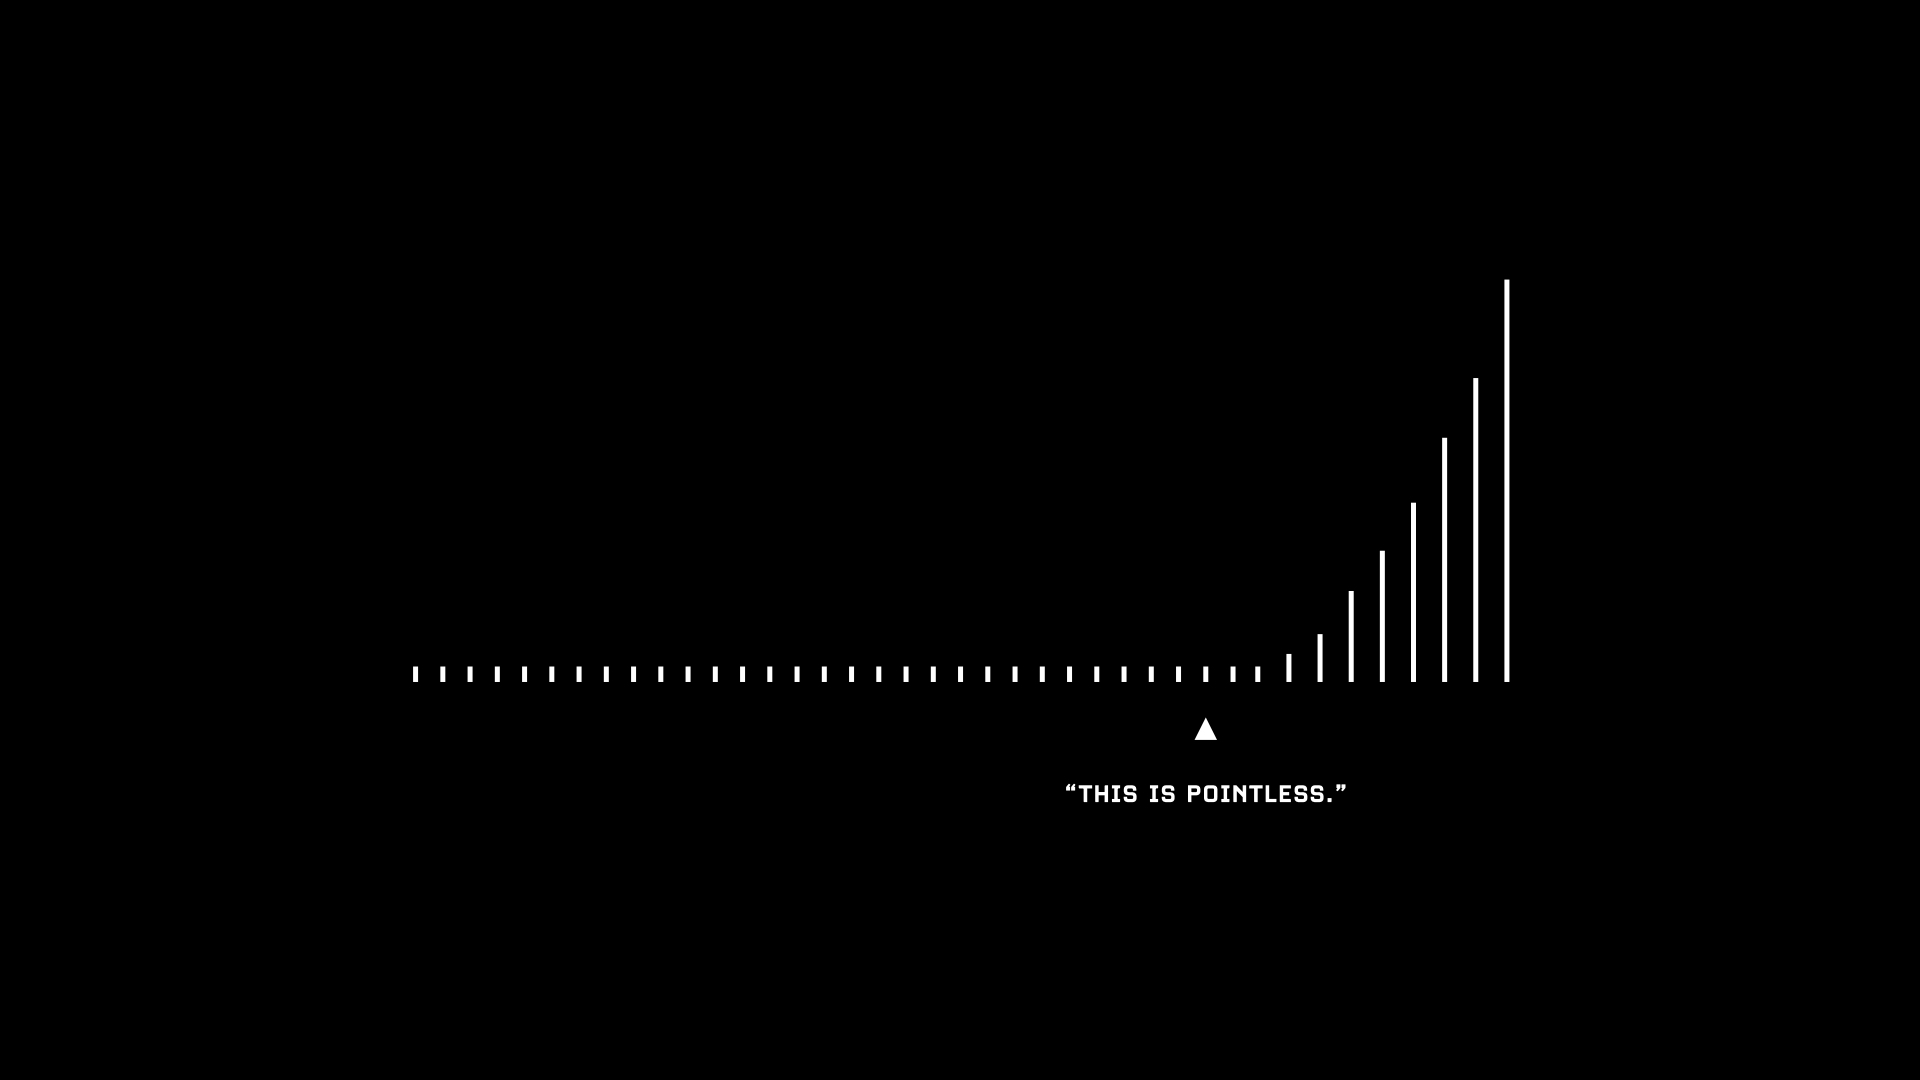 A black and white bar chart with the text "this is pointless" right before the chart starts compounding.